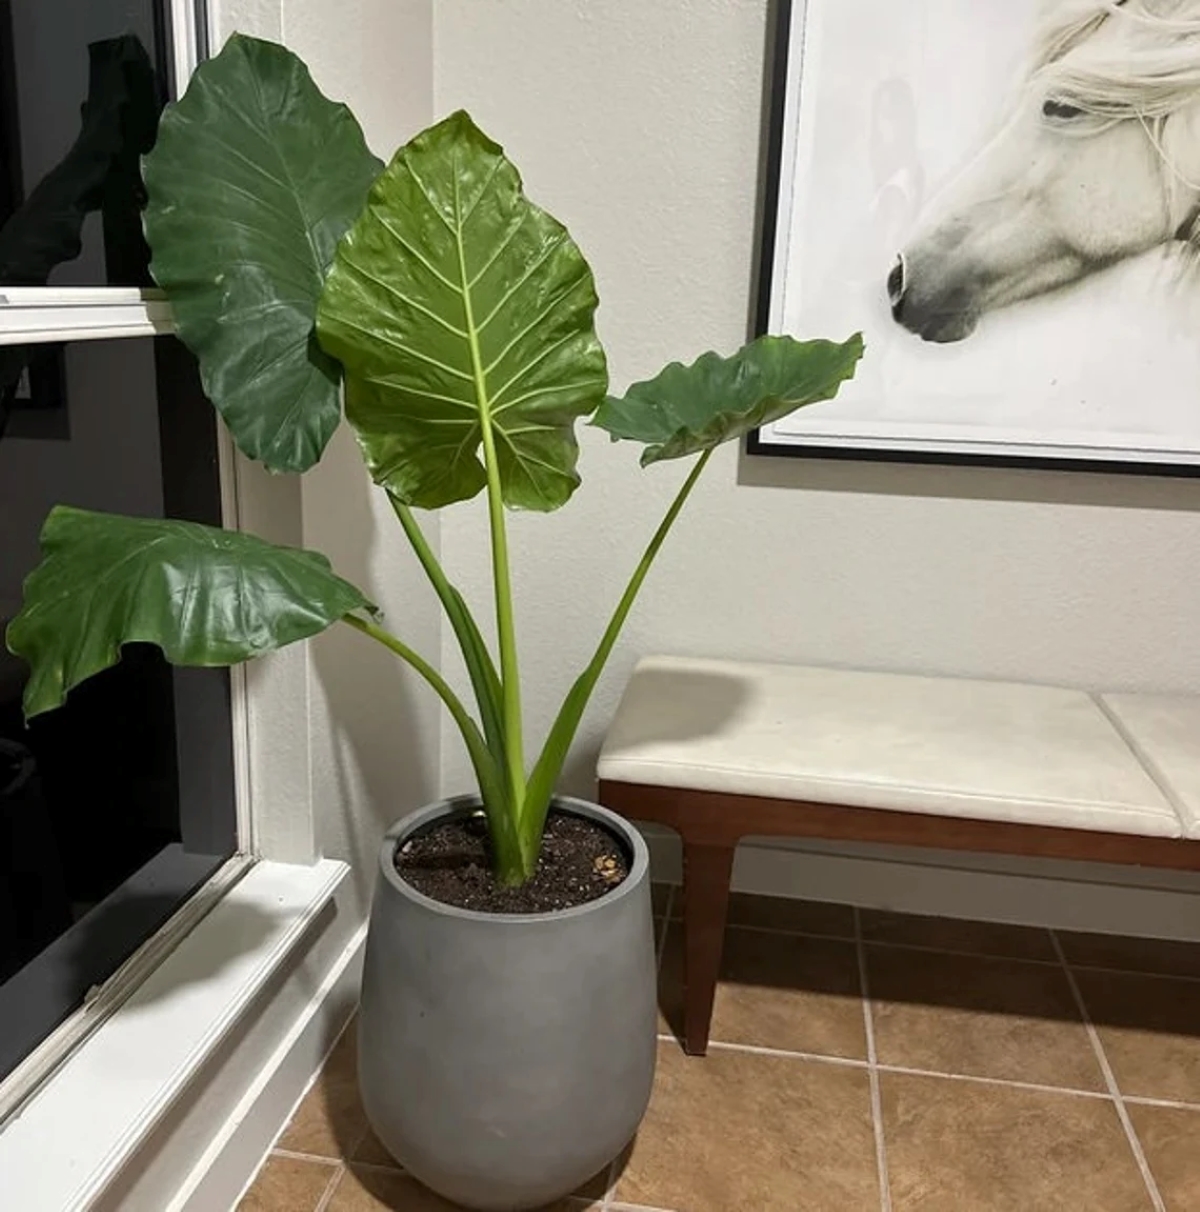 Large elephant ear plant in planter